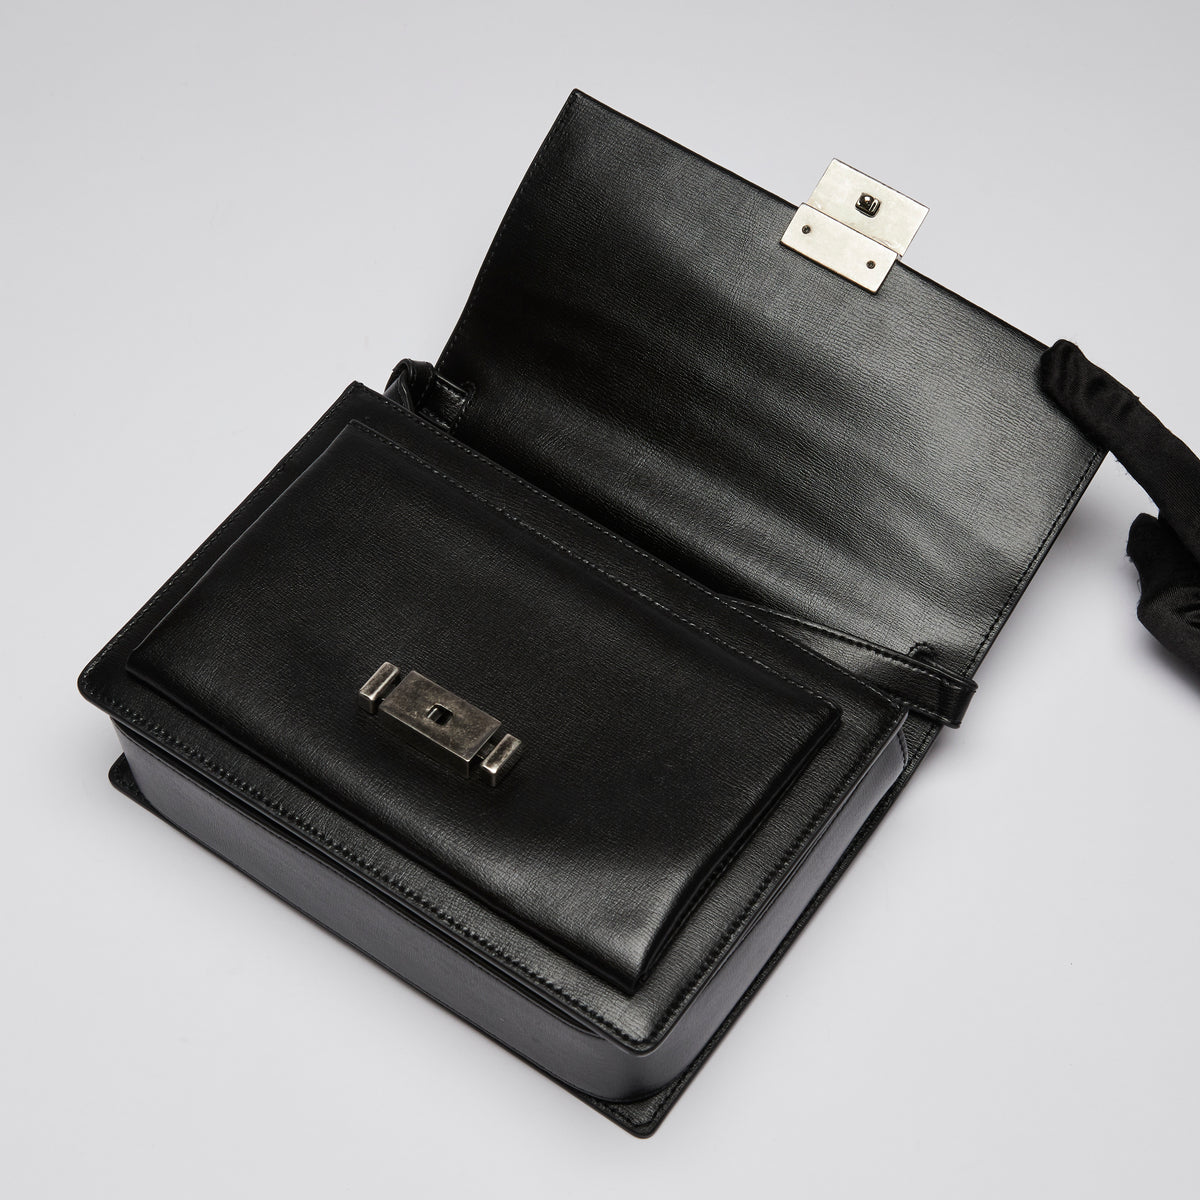 Excellent Pre-Loved Black Smooth Leather Top Handle Flap Over Shoulder Bag with Aged Silver Tone Hardware.(flap)